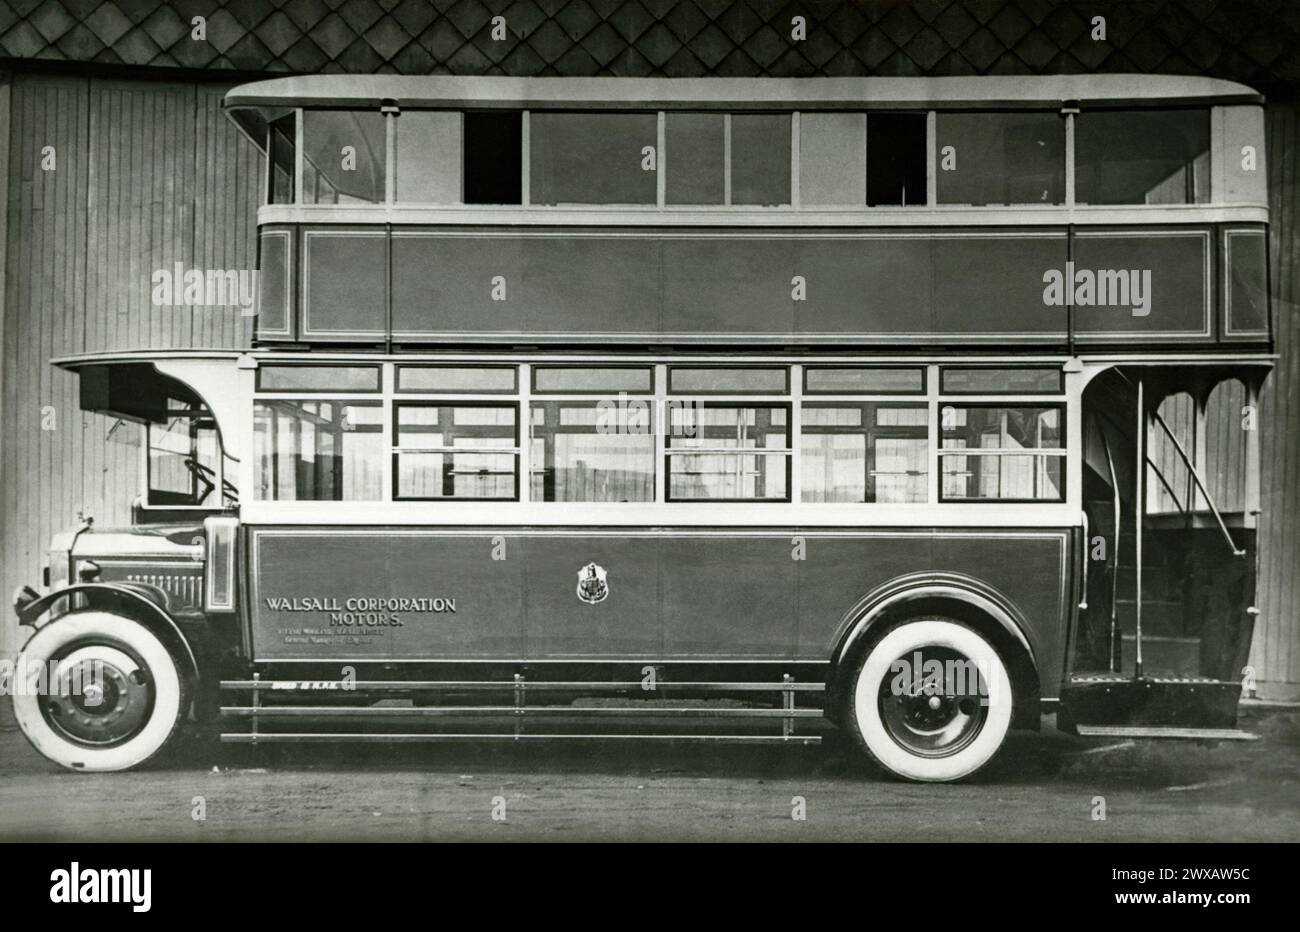 A Walsall Corporation Motors double-decker bus c. 1930 – it was used on routes in and around Walsall, West Midlands, England, UK. Number 21 had a Dennis chassis, petrol engine and a body built by Short Bothers and began life in Walsall in 1929. This is taken from an old photograph album – a vintage 1920s/30s photograph. Stock Photo